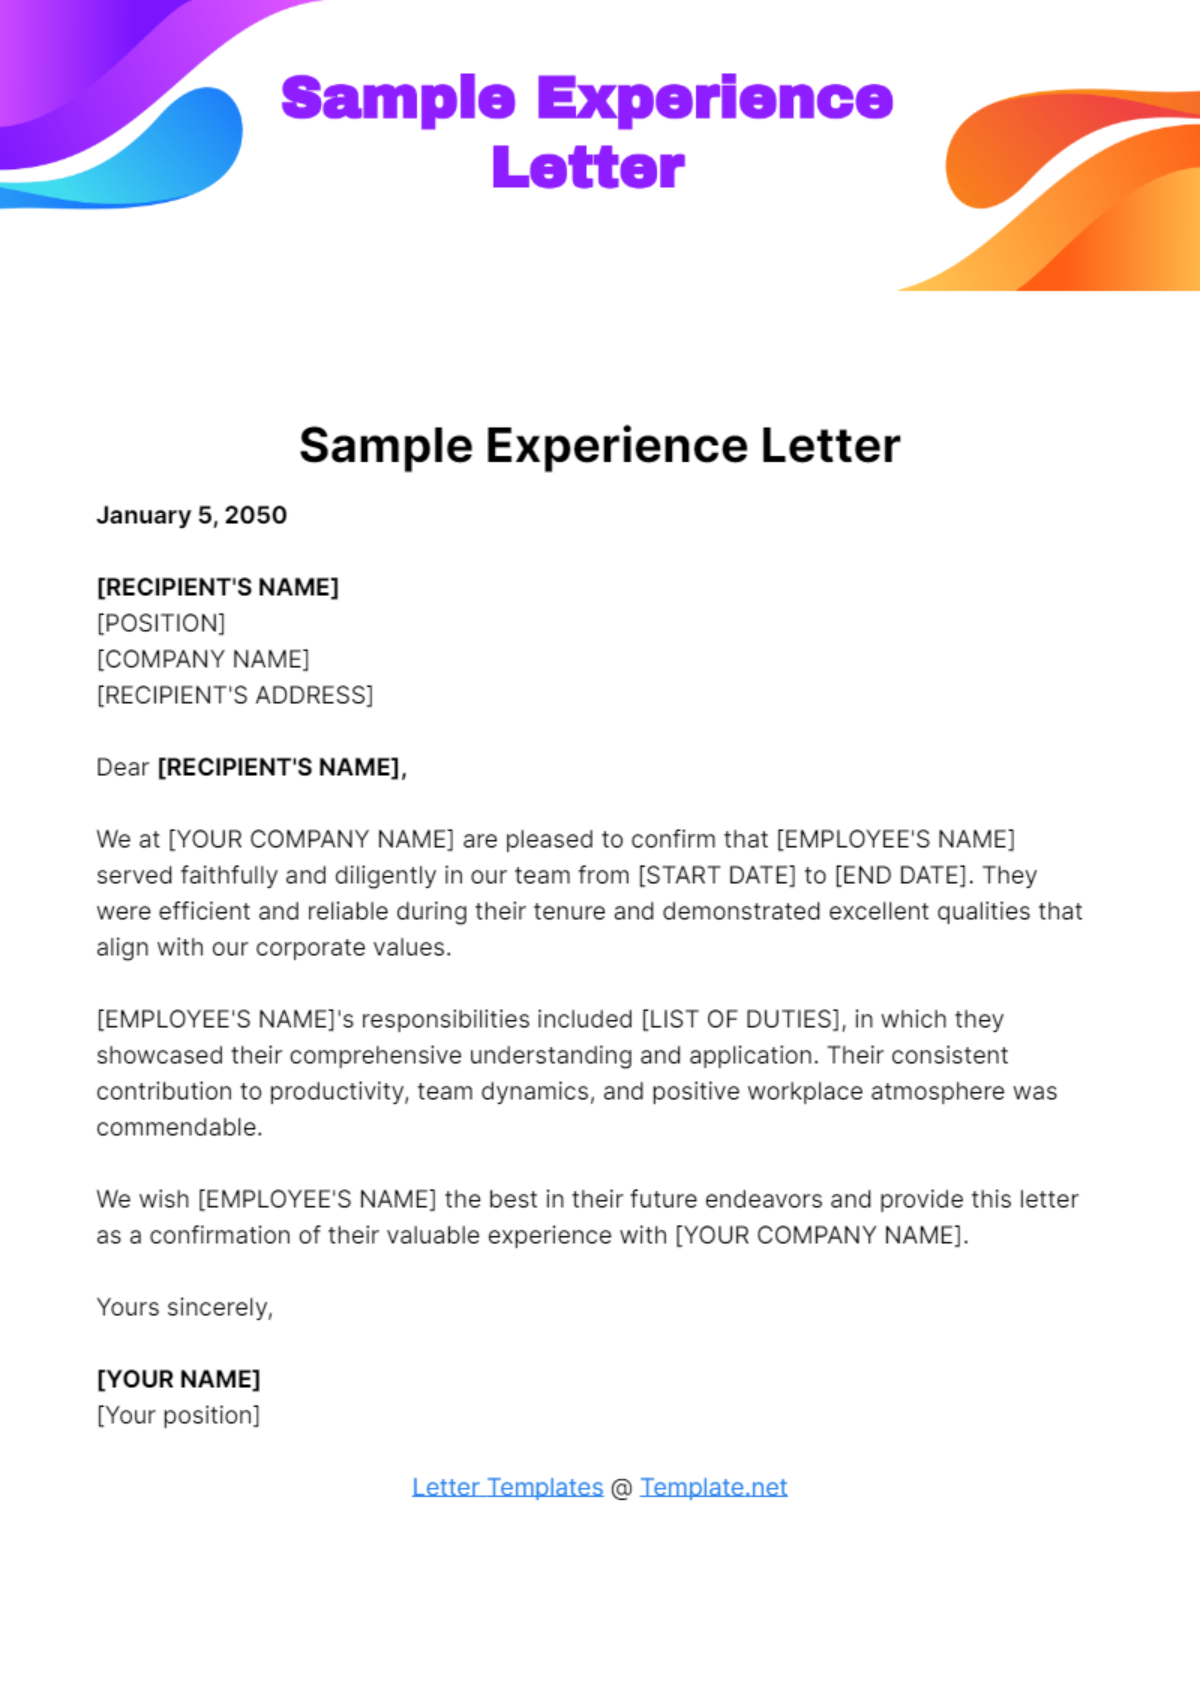 Free Sample Experience Letter Template